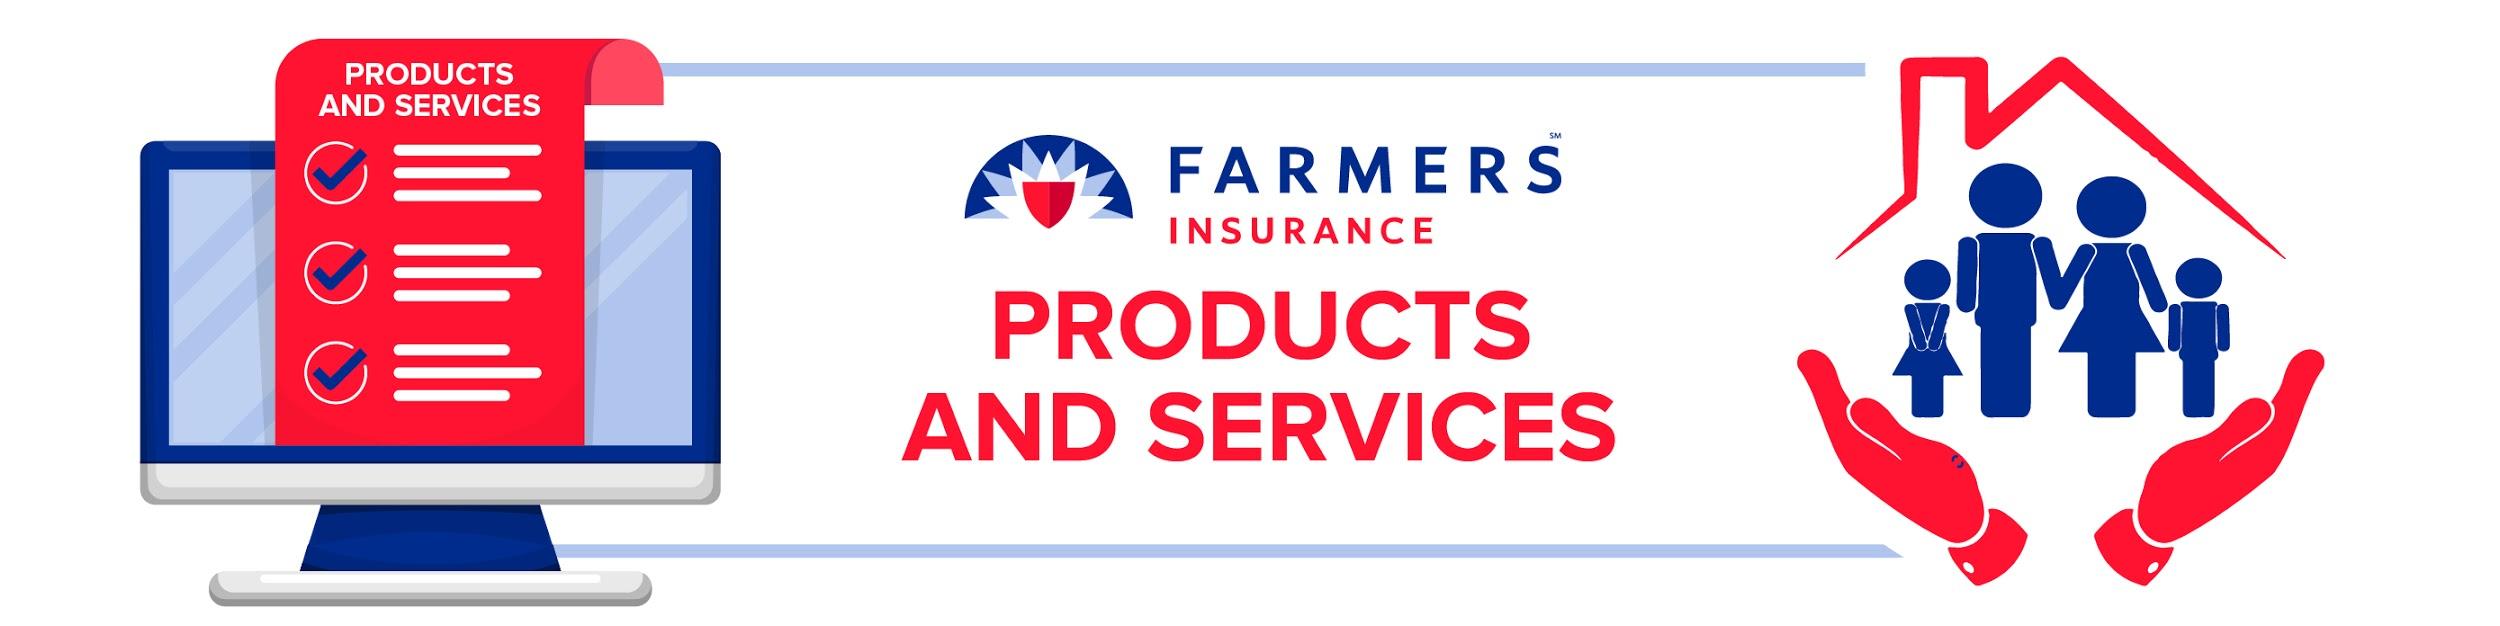 Everything You Need to Know About Farmers Insurance ...